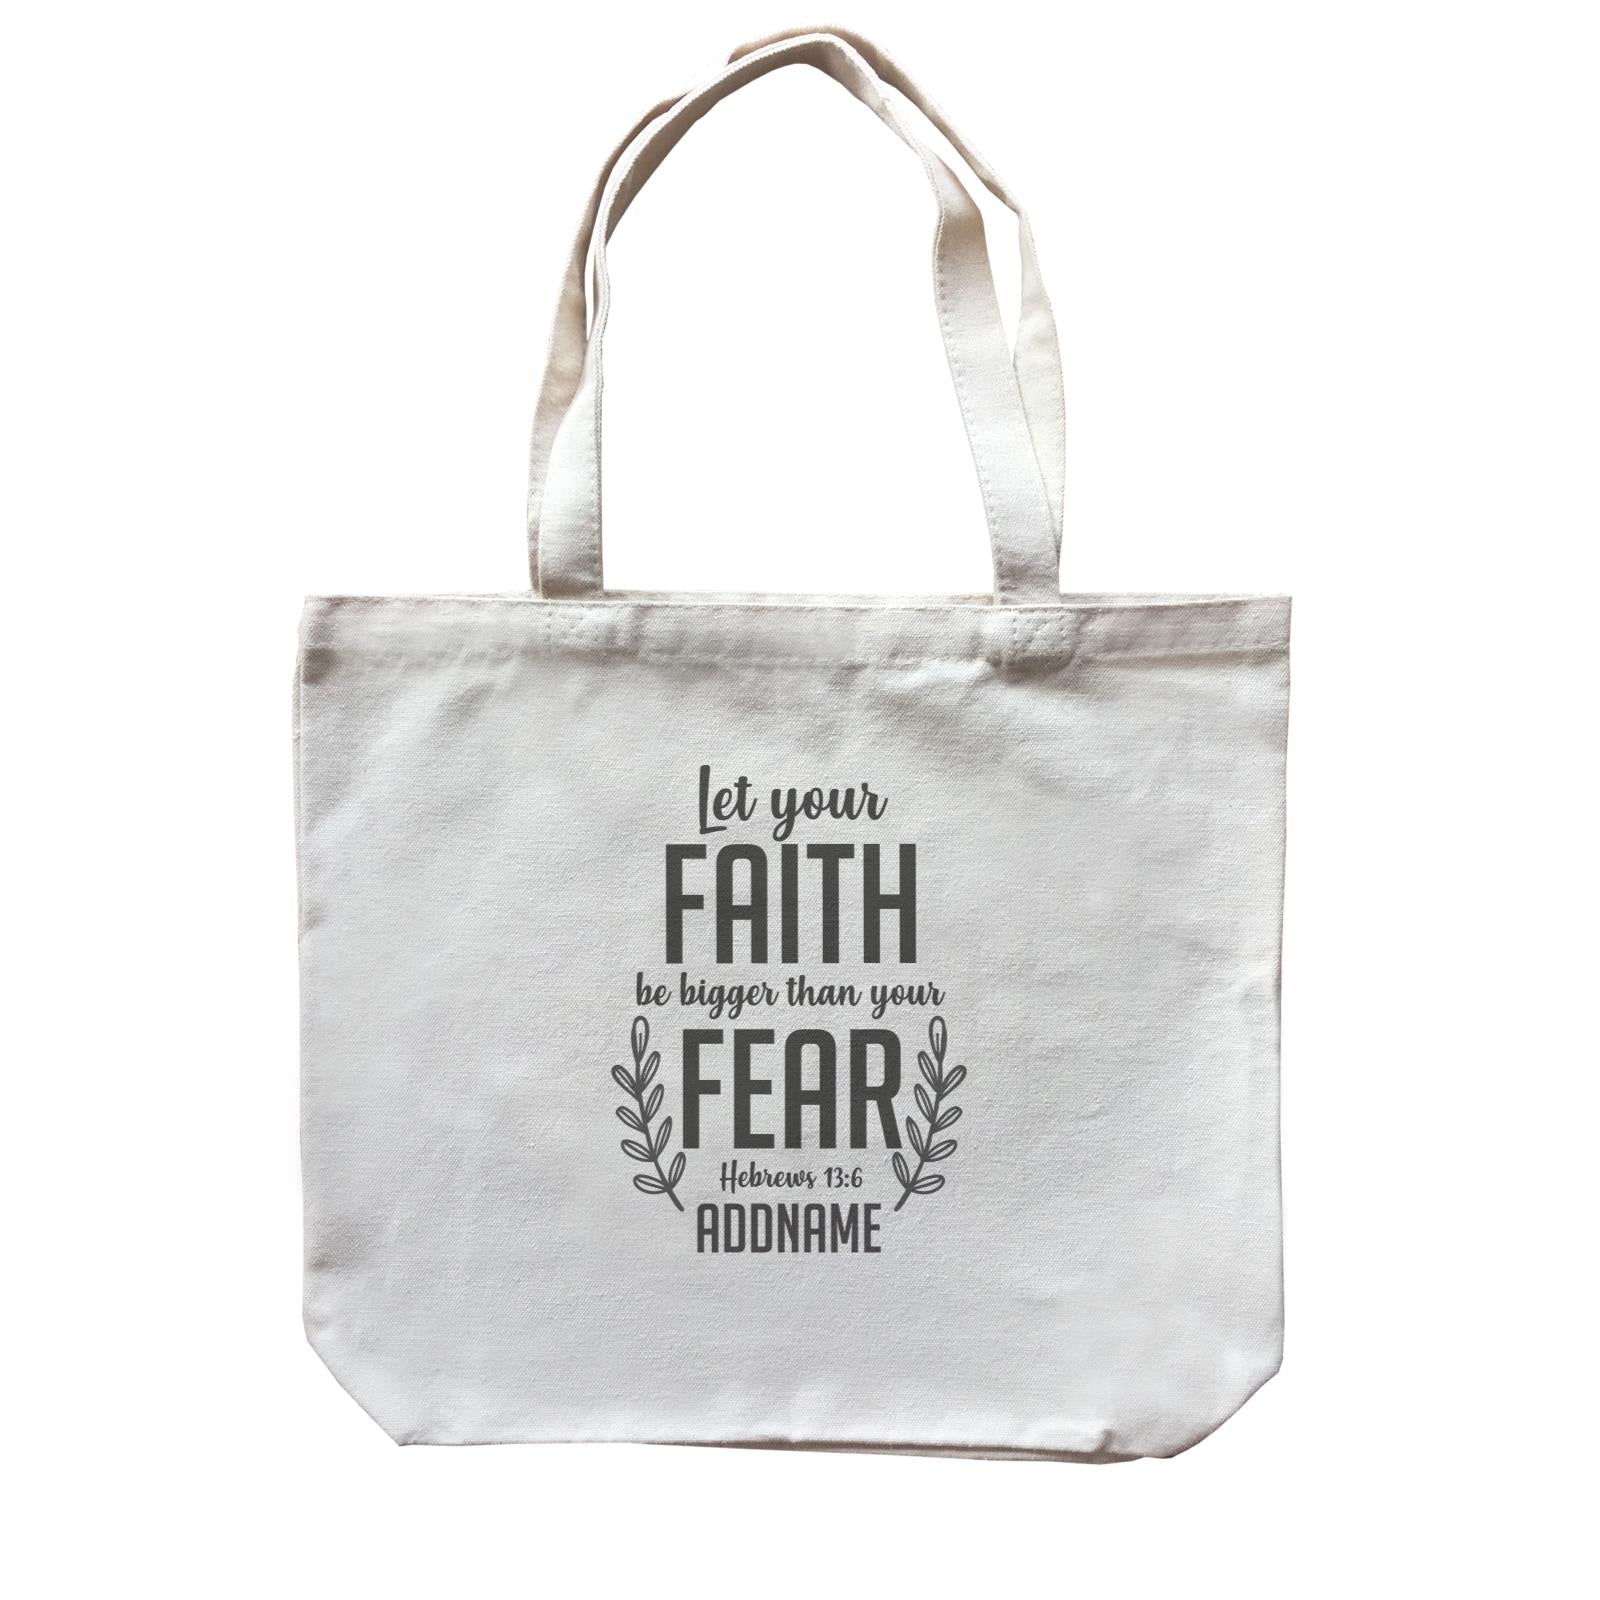 Christ Newborn Let Your Faith Be Bigger Than Your Fear Hebrews 13.6 Addname Canvas Bag